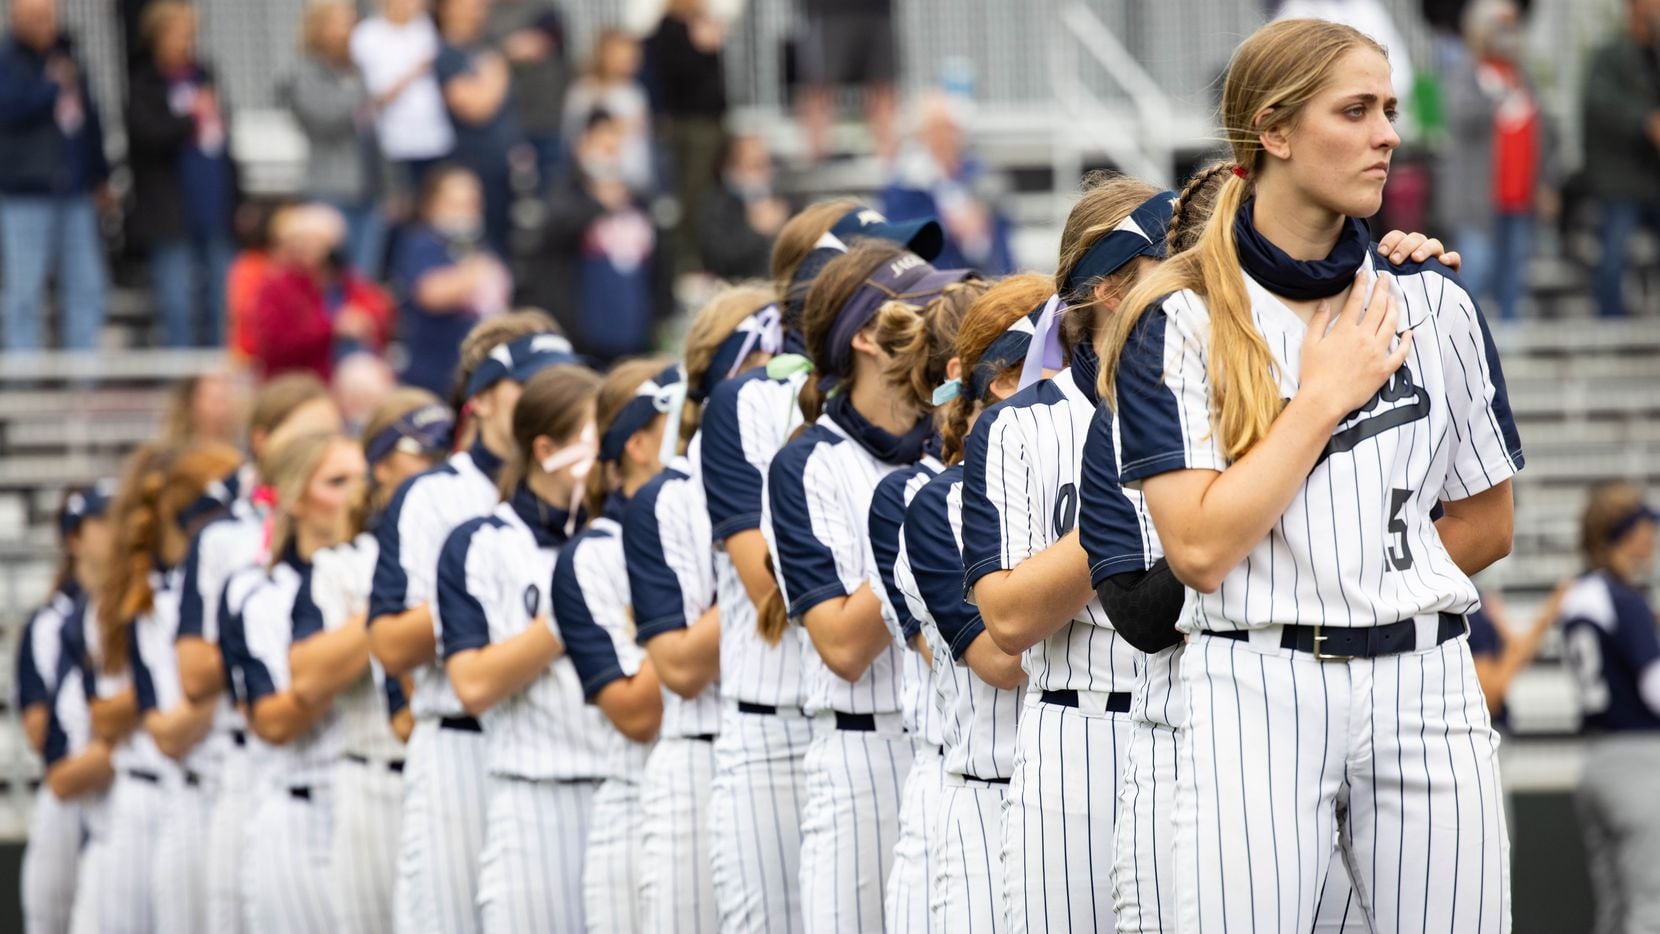 Flower Mound's pitcher Landrie Harris (15) stands with her team during the national anthem before a softball Class 6A bi-district playoff game against McKinney Boyd on Friday, April 30, 2021, in Denton.